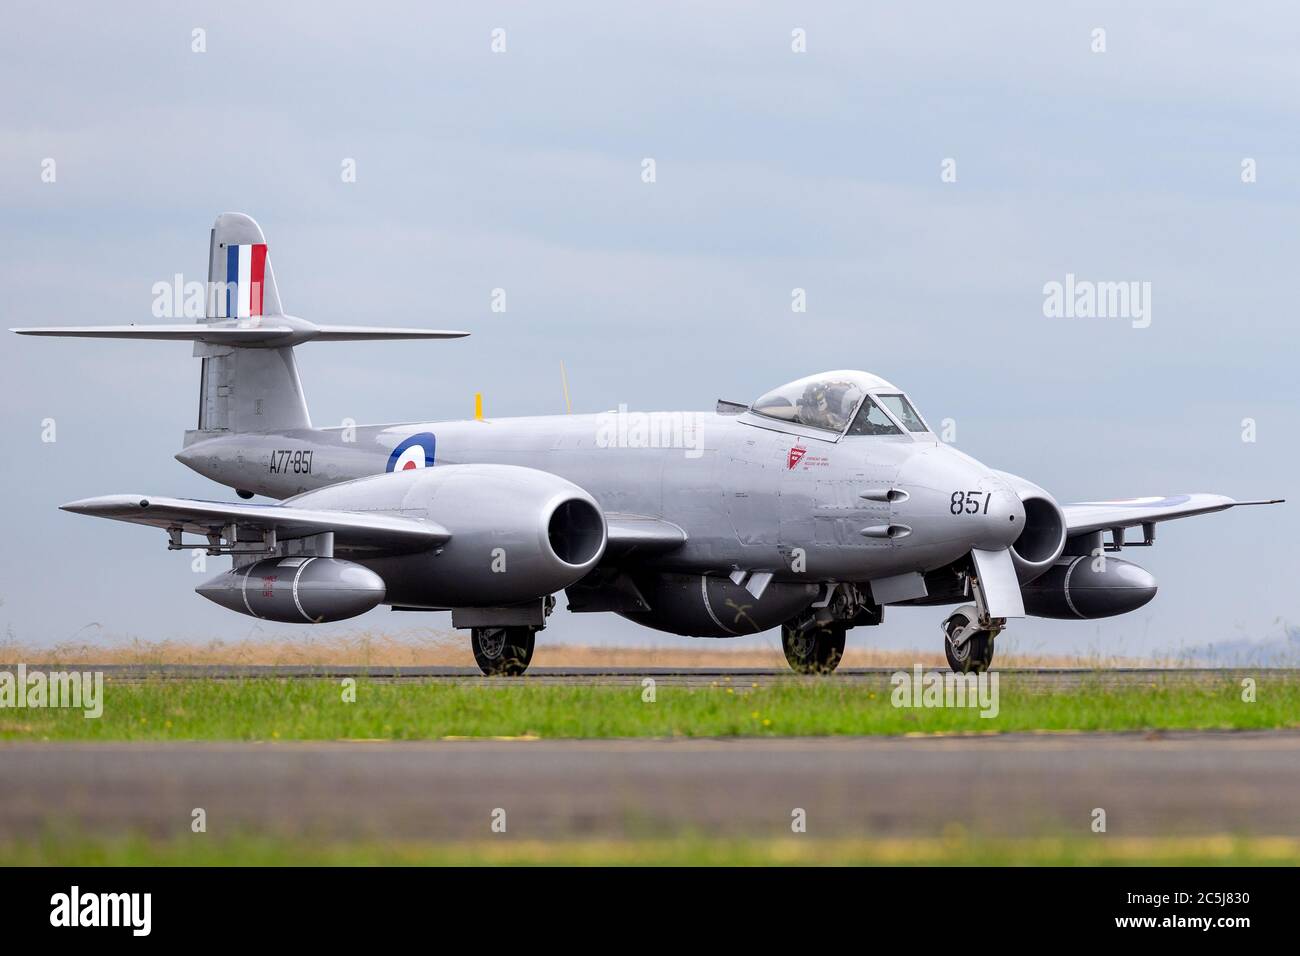 Gloster Meteor F.8 aircraft VH-MBX in Korean War era Royal Australian Air Force (RAAF) markings taxiing down the runway at Avalon airport. Stock Photo